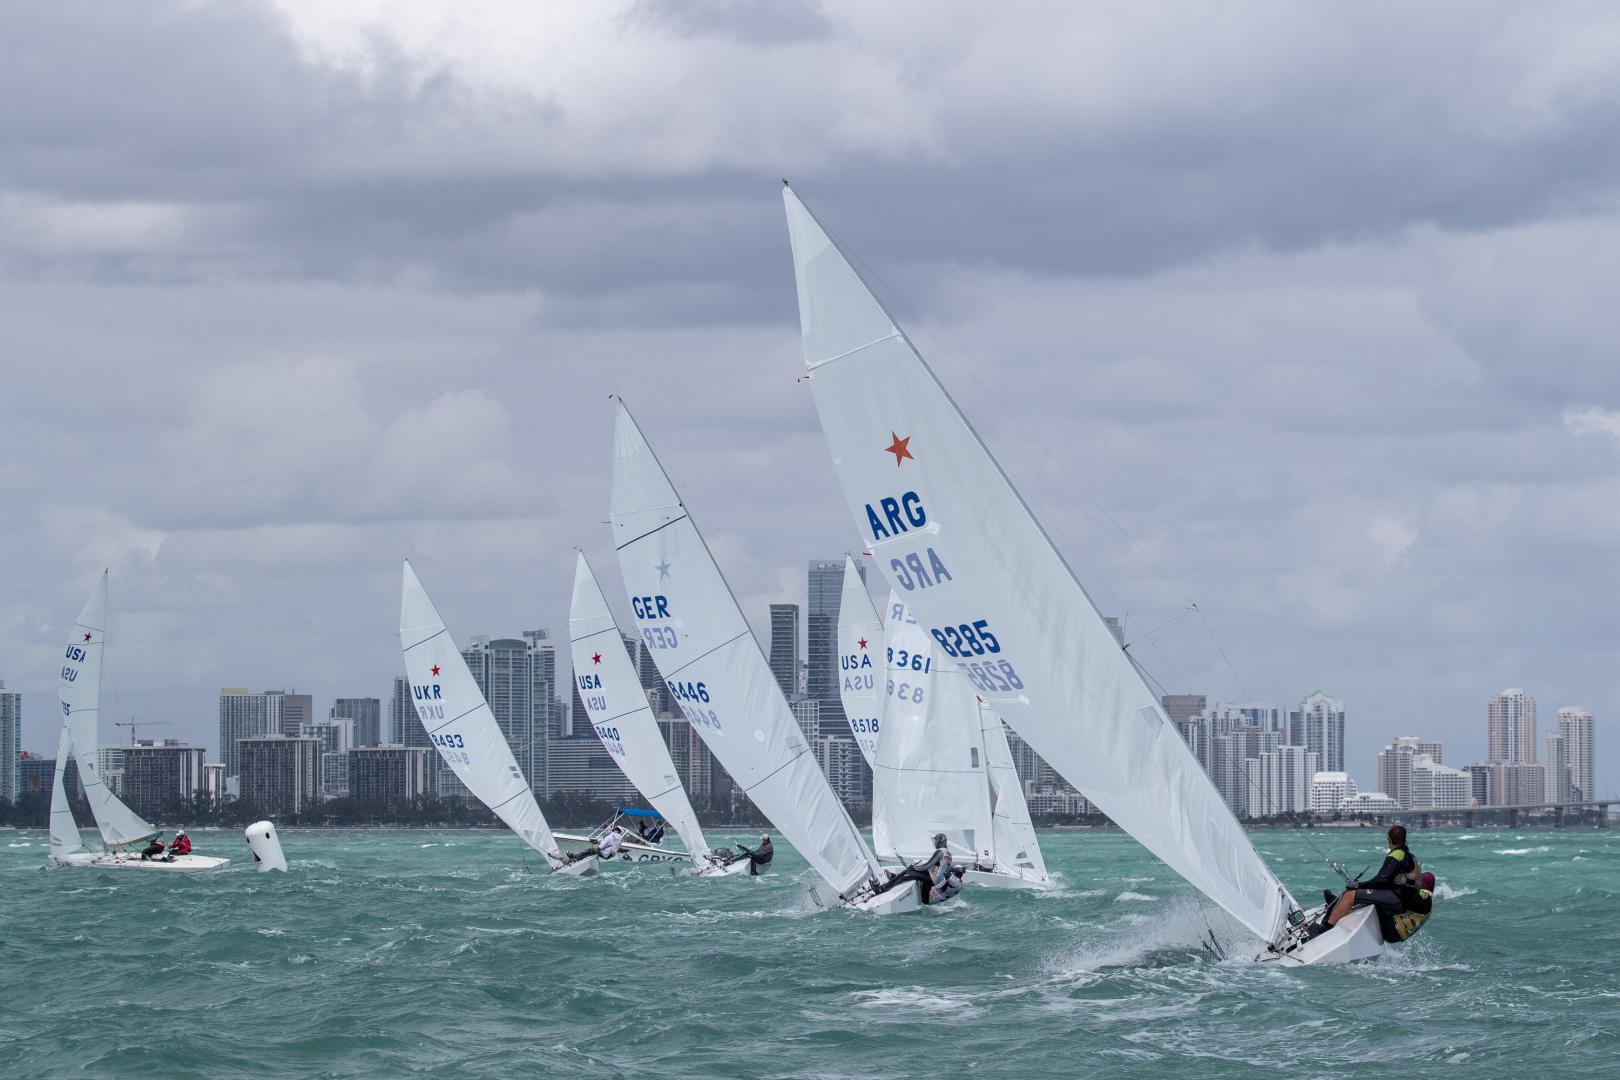 Star fleet racing off Miami on day 2 at 94th Bacardi Cup 